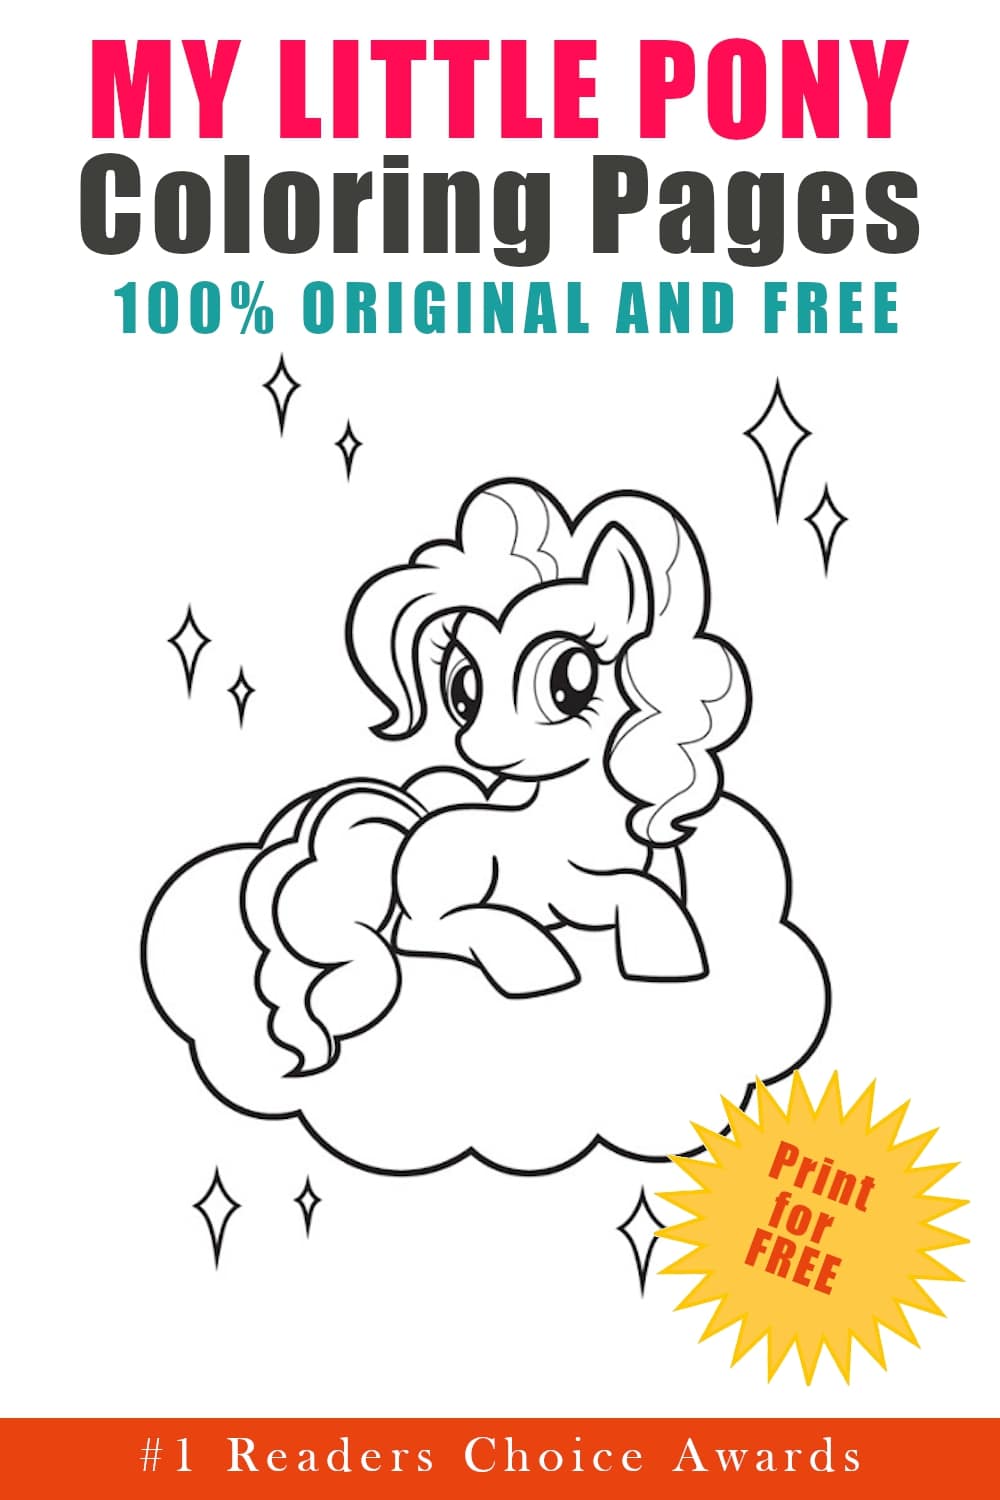 free original my little pony coloring pages